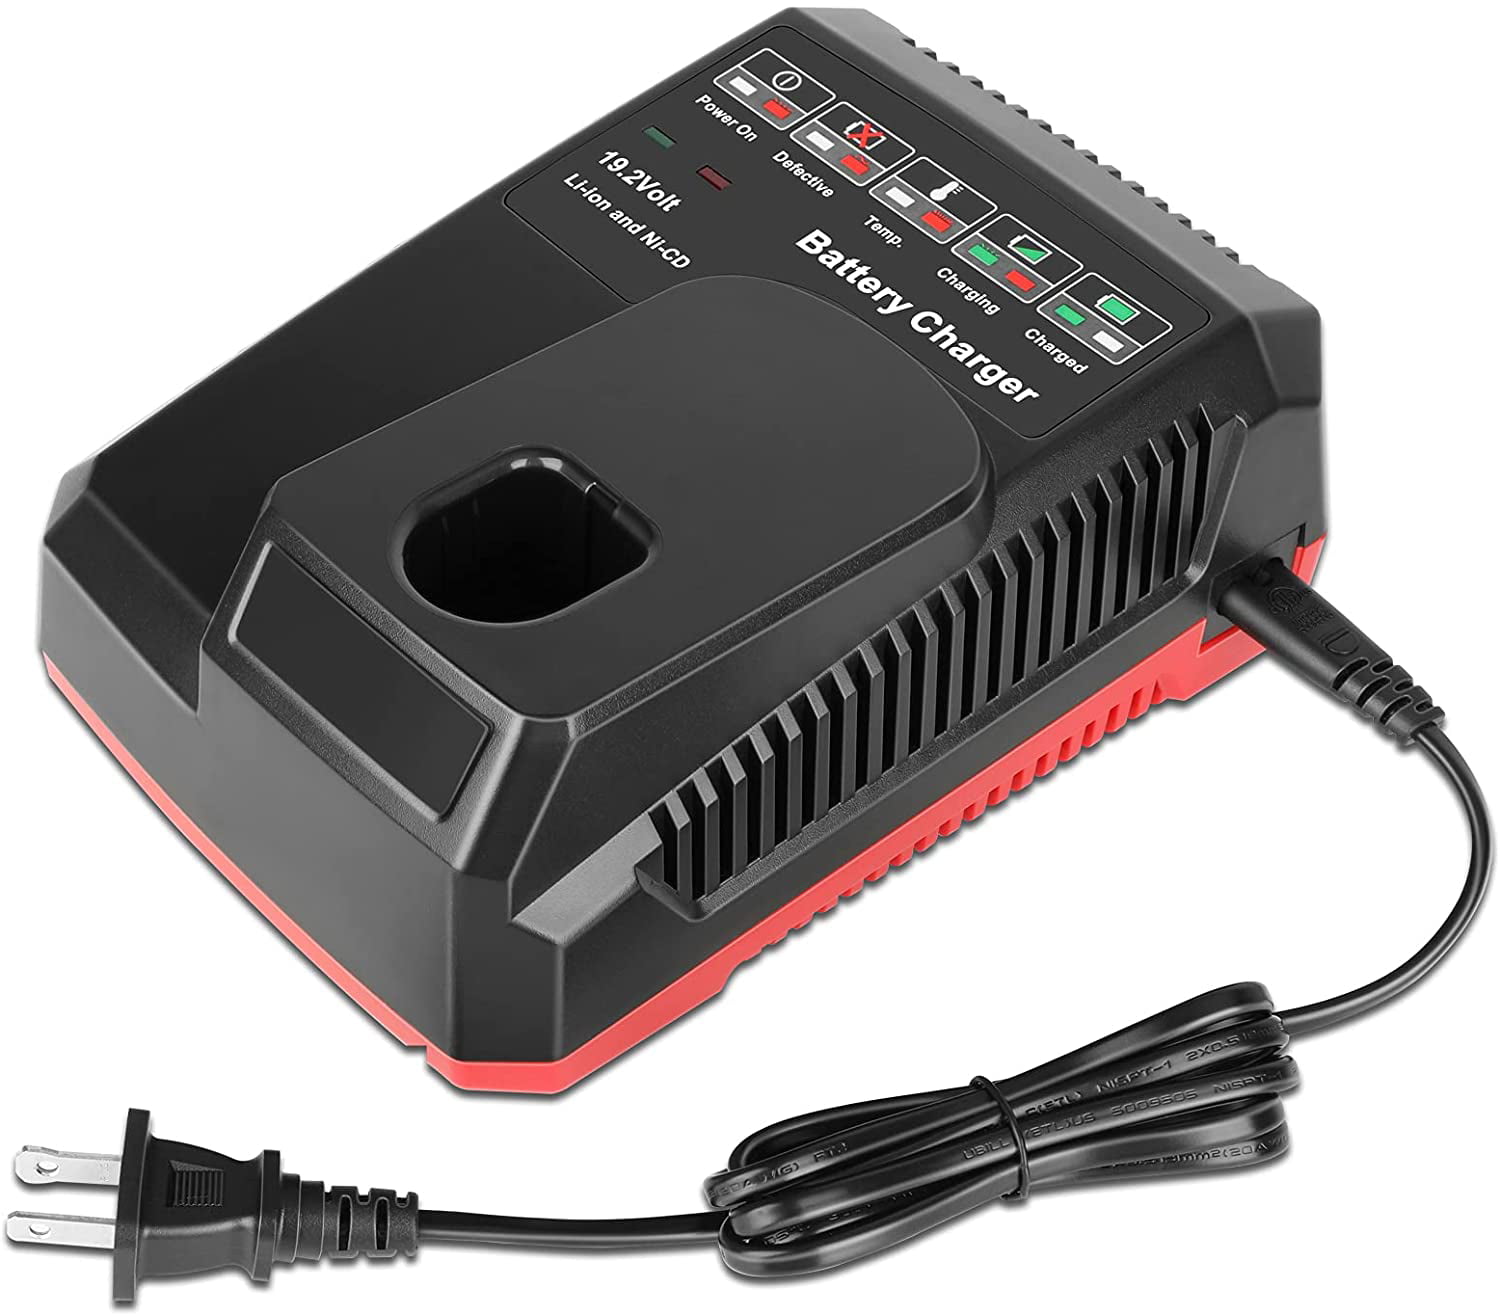 19.2V 5.0Ah For Craftsman C3 XCP Lithium Battery/Charger 11375 11376 130279005 